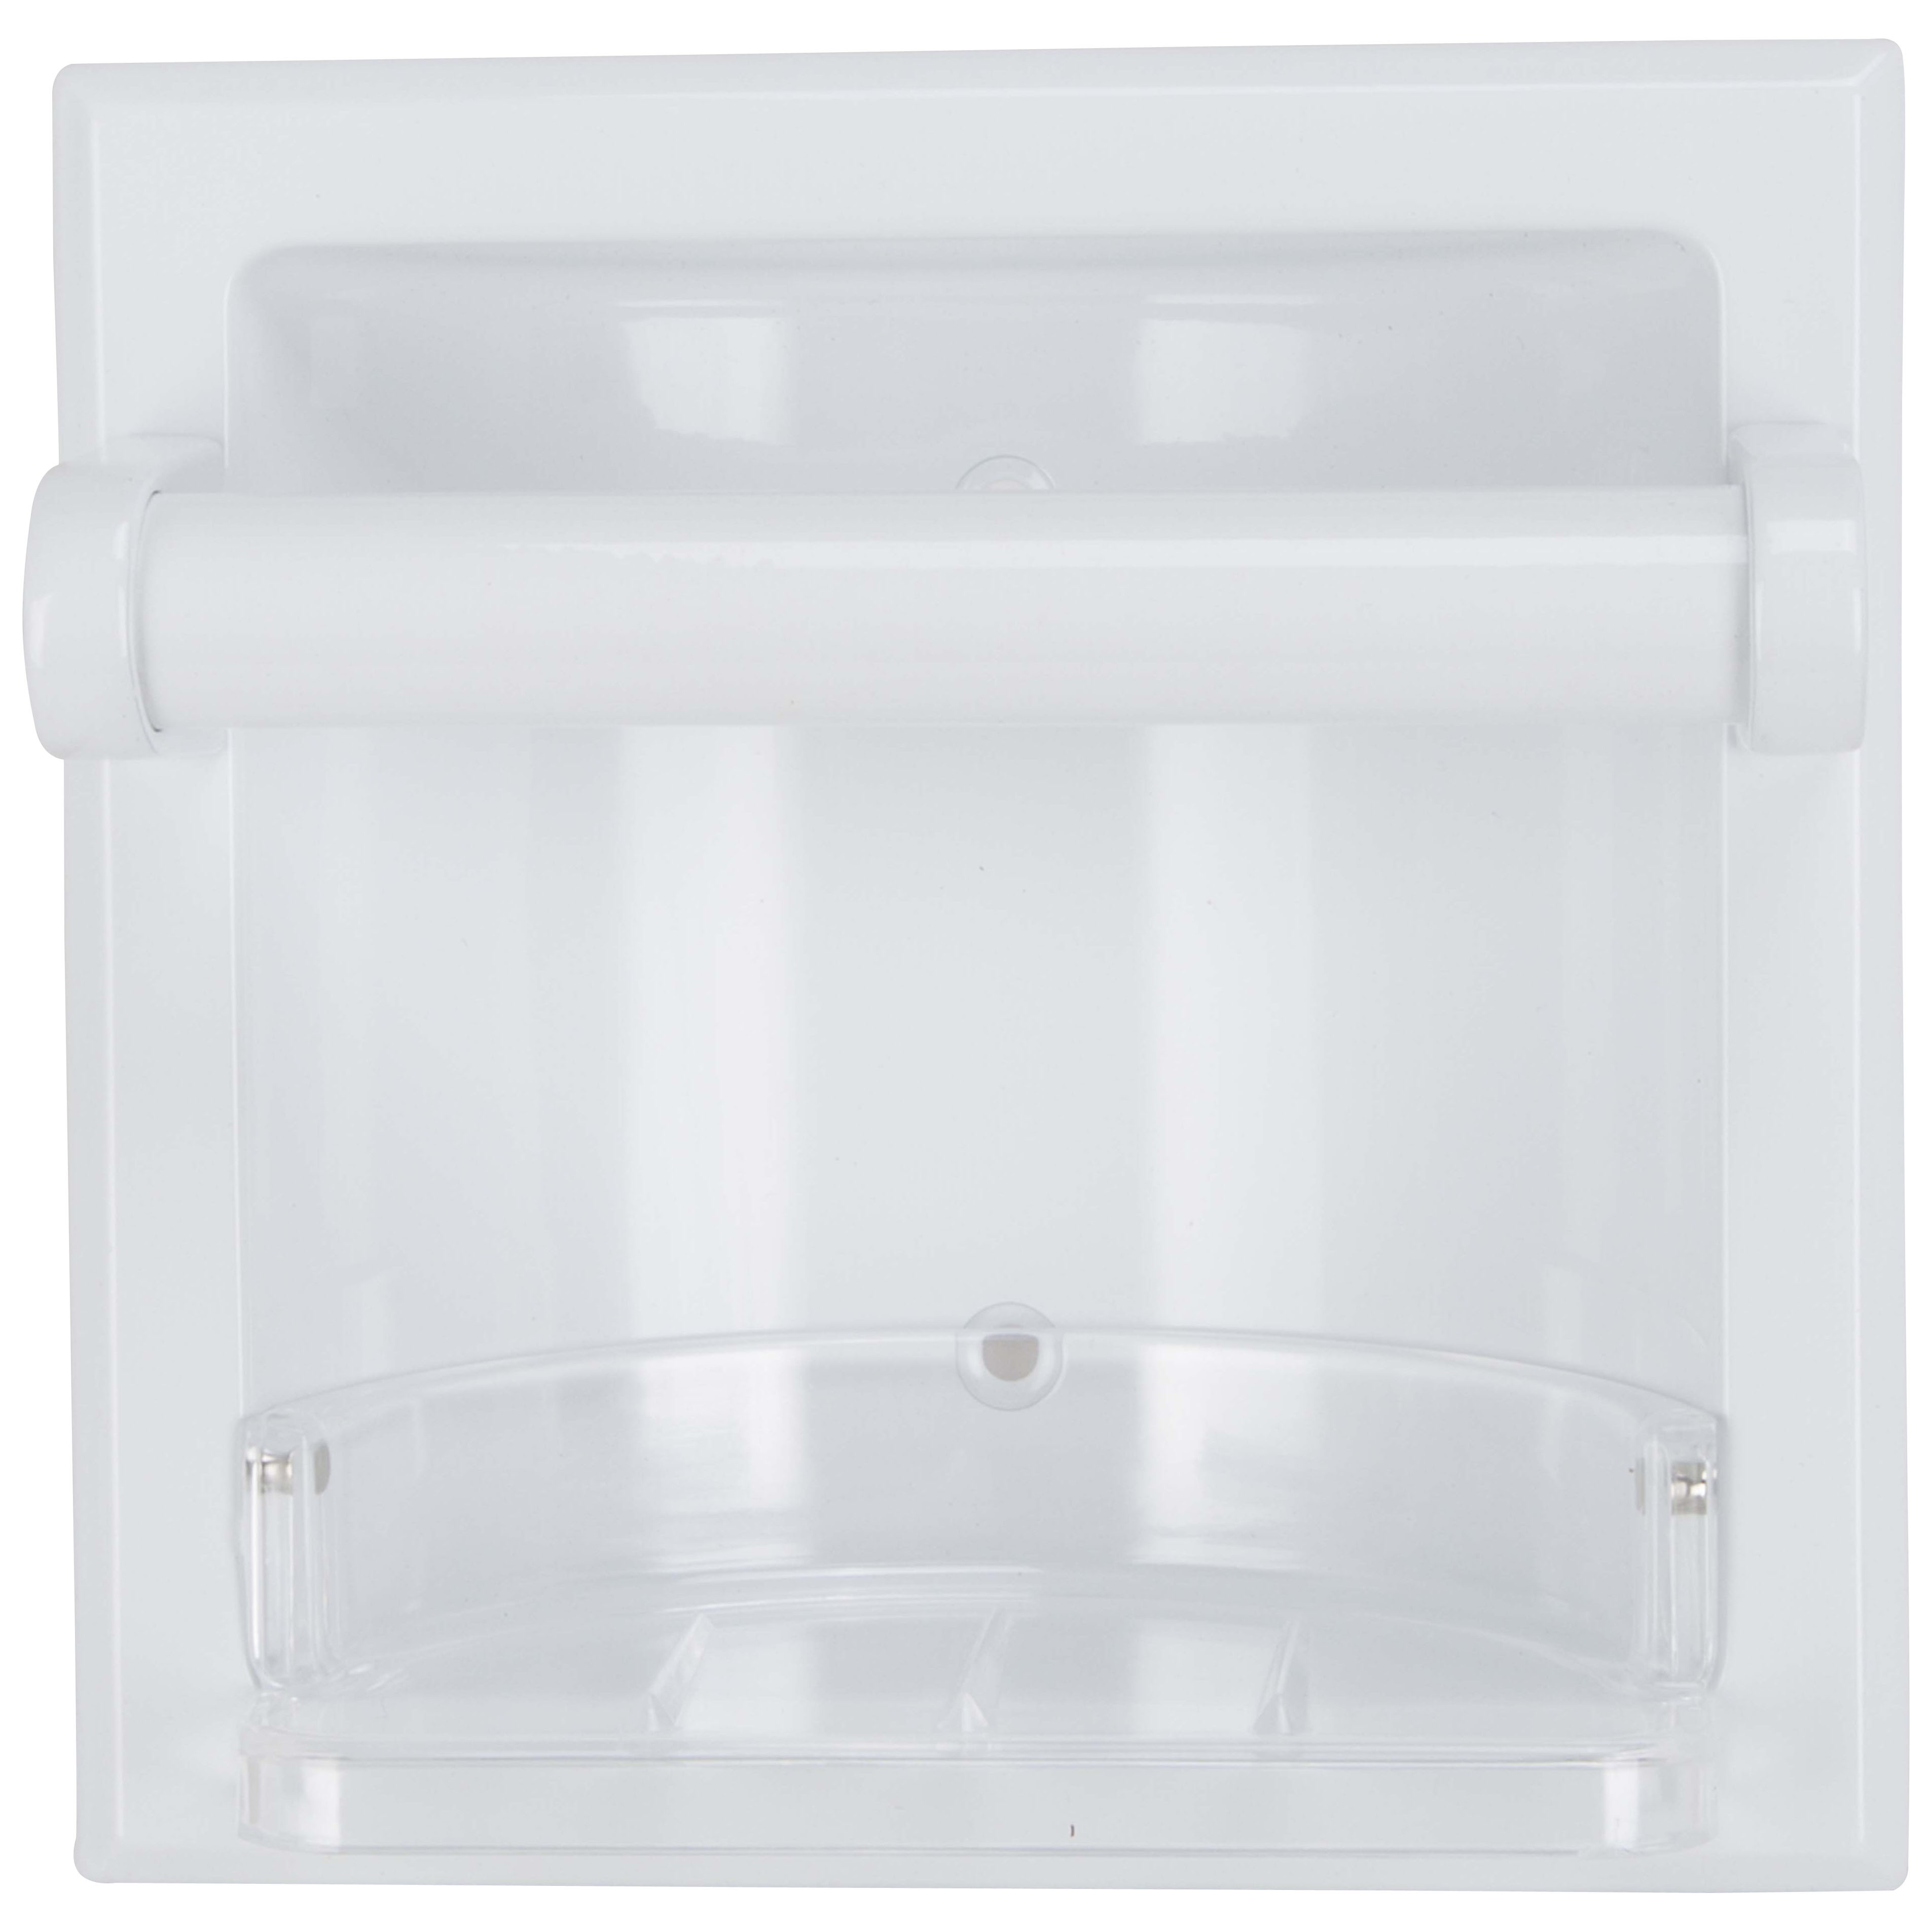 L770H-51-07 Soap Holder and Grab Bar, Recessed Mounting, Plastic Roller/Zinc, White